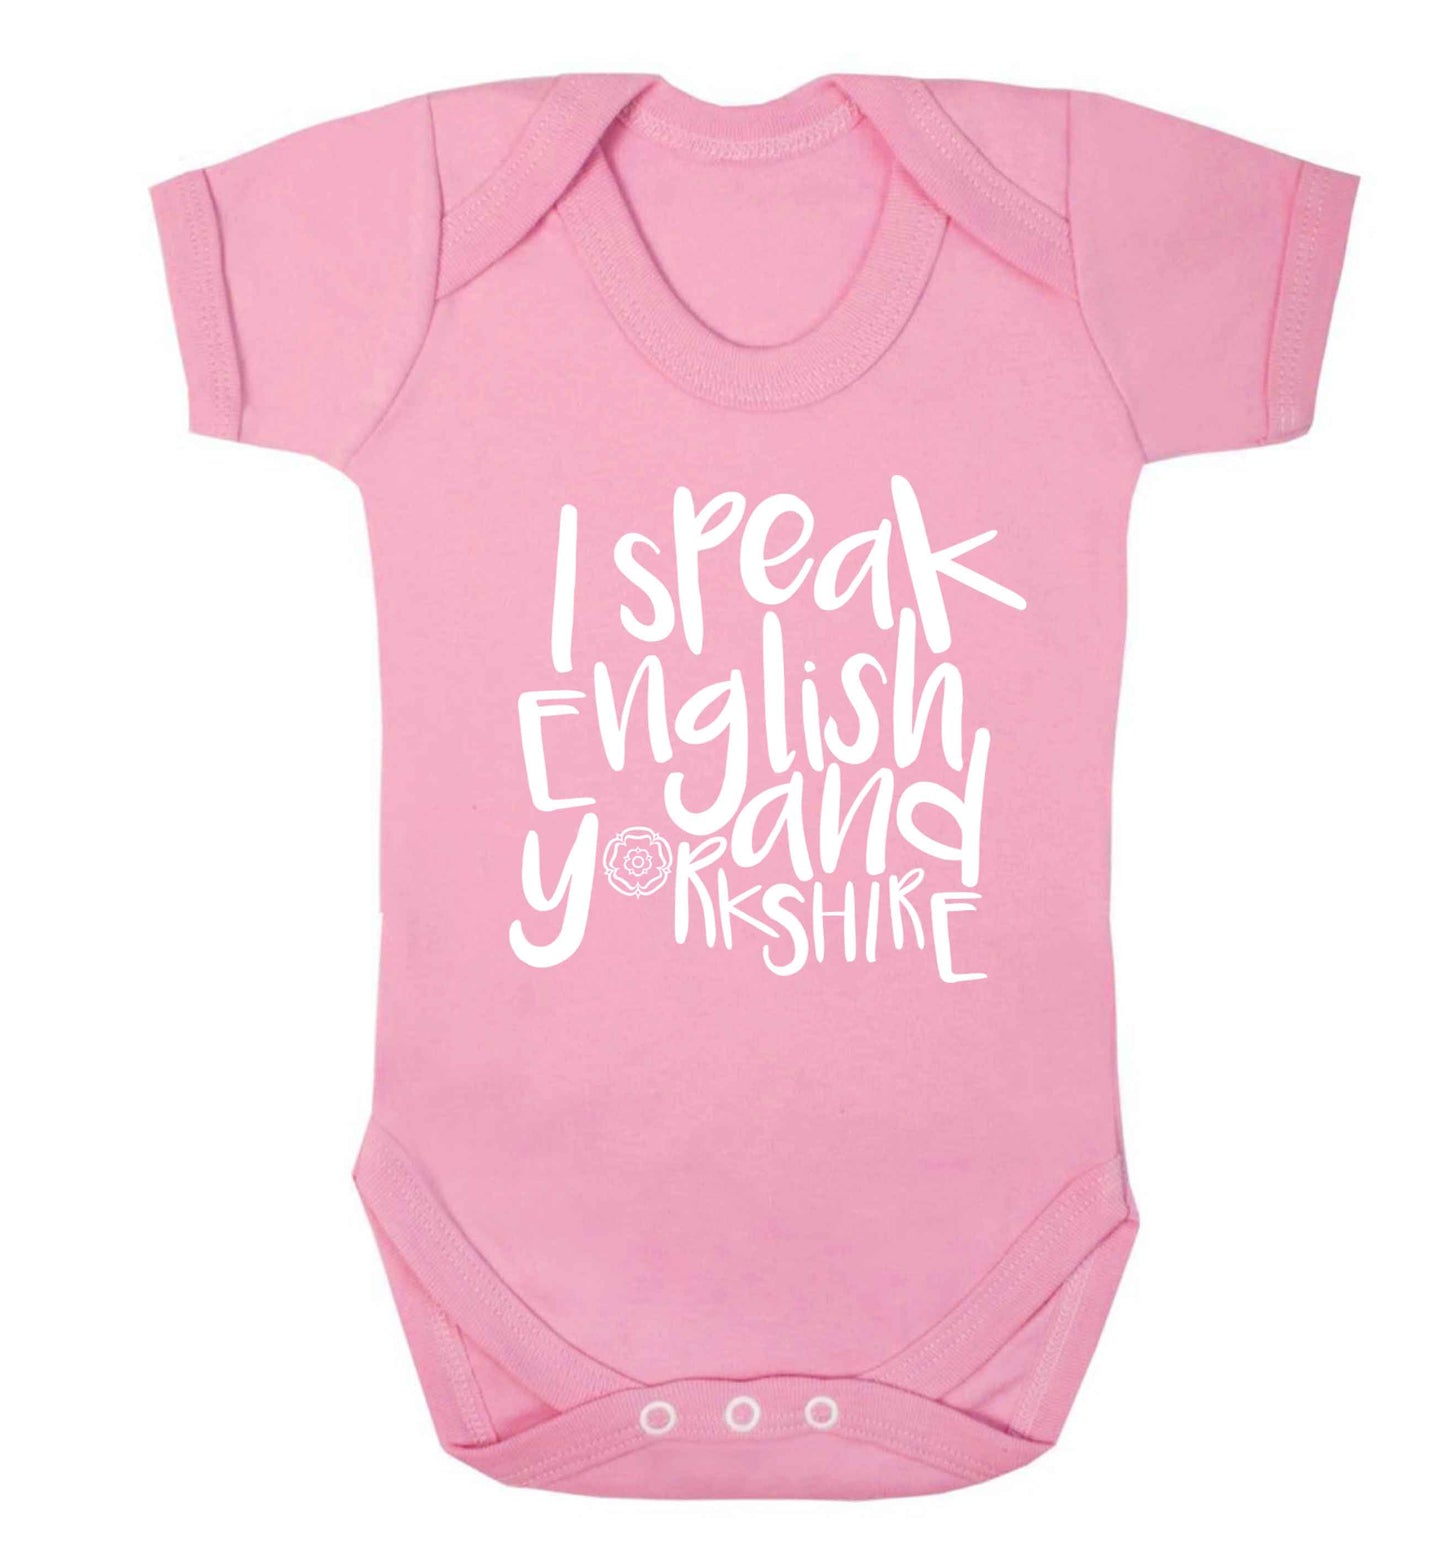 I speak English and Yorkshire Baby Vest pale pink 18-24 months